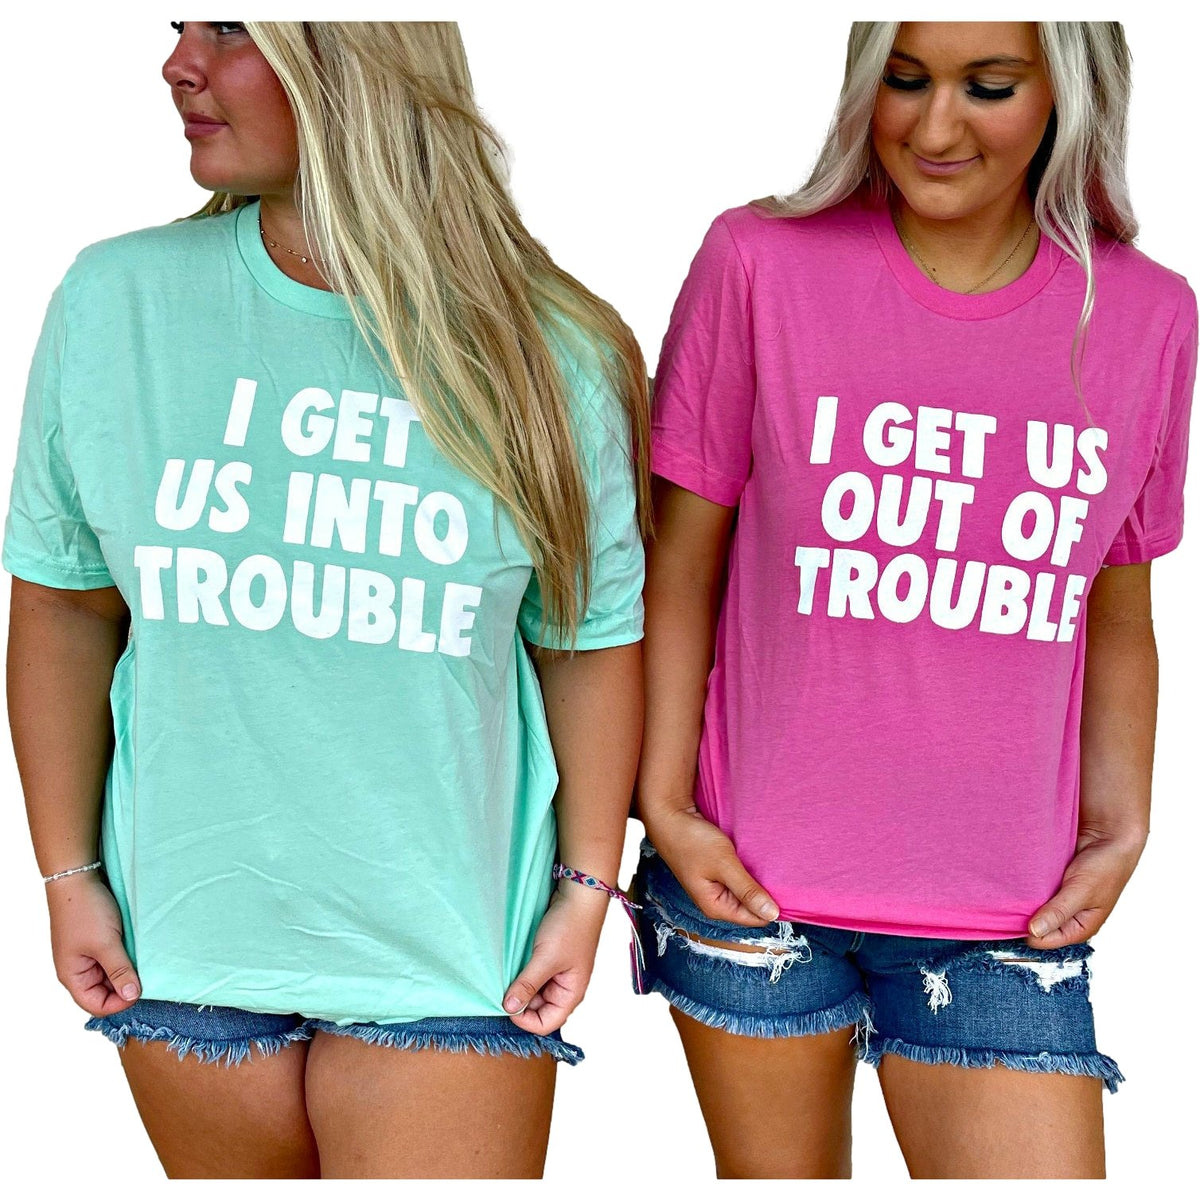 I get us into trouble/ I get us out of trouble tees by Gabriel Clothing Company